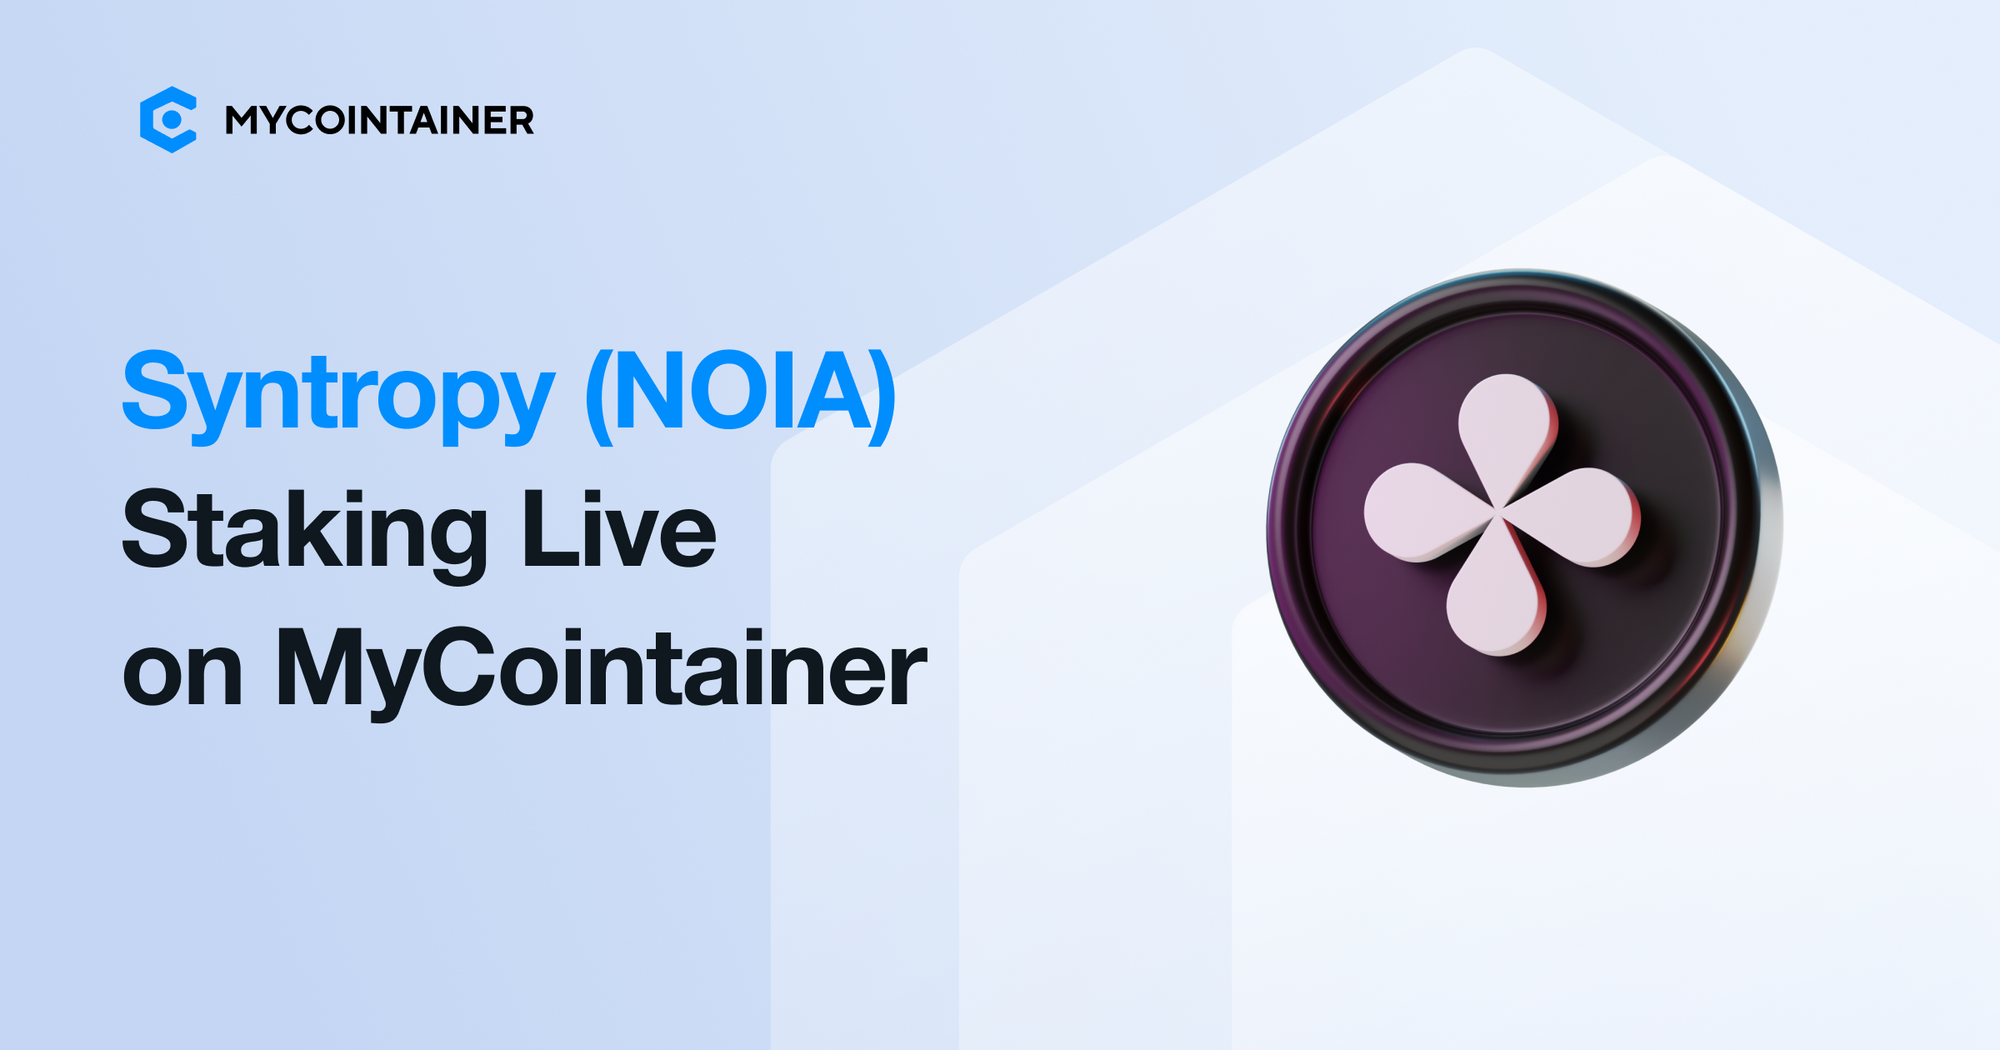 Syntropy (NOIA) Staking Live on MyCointainer